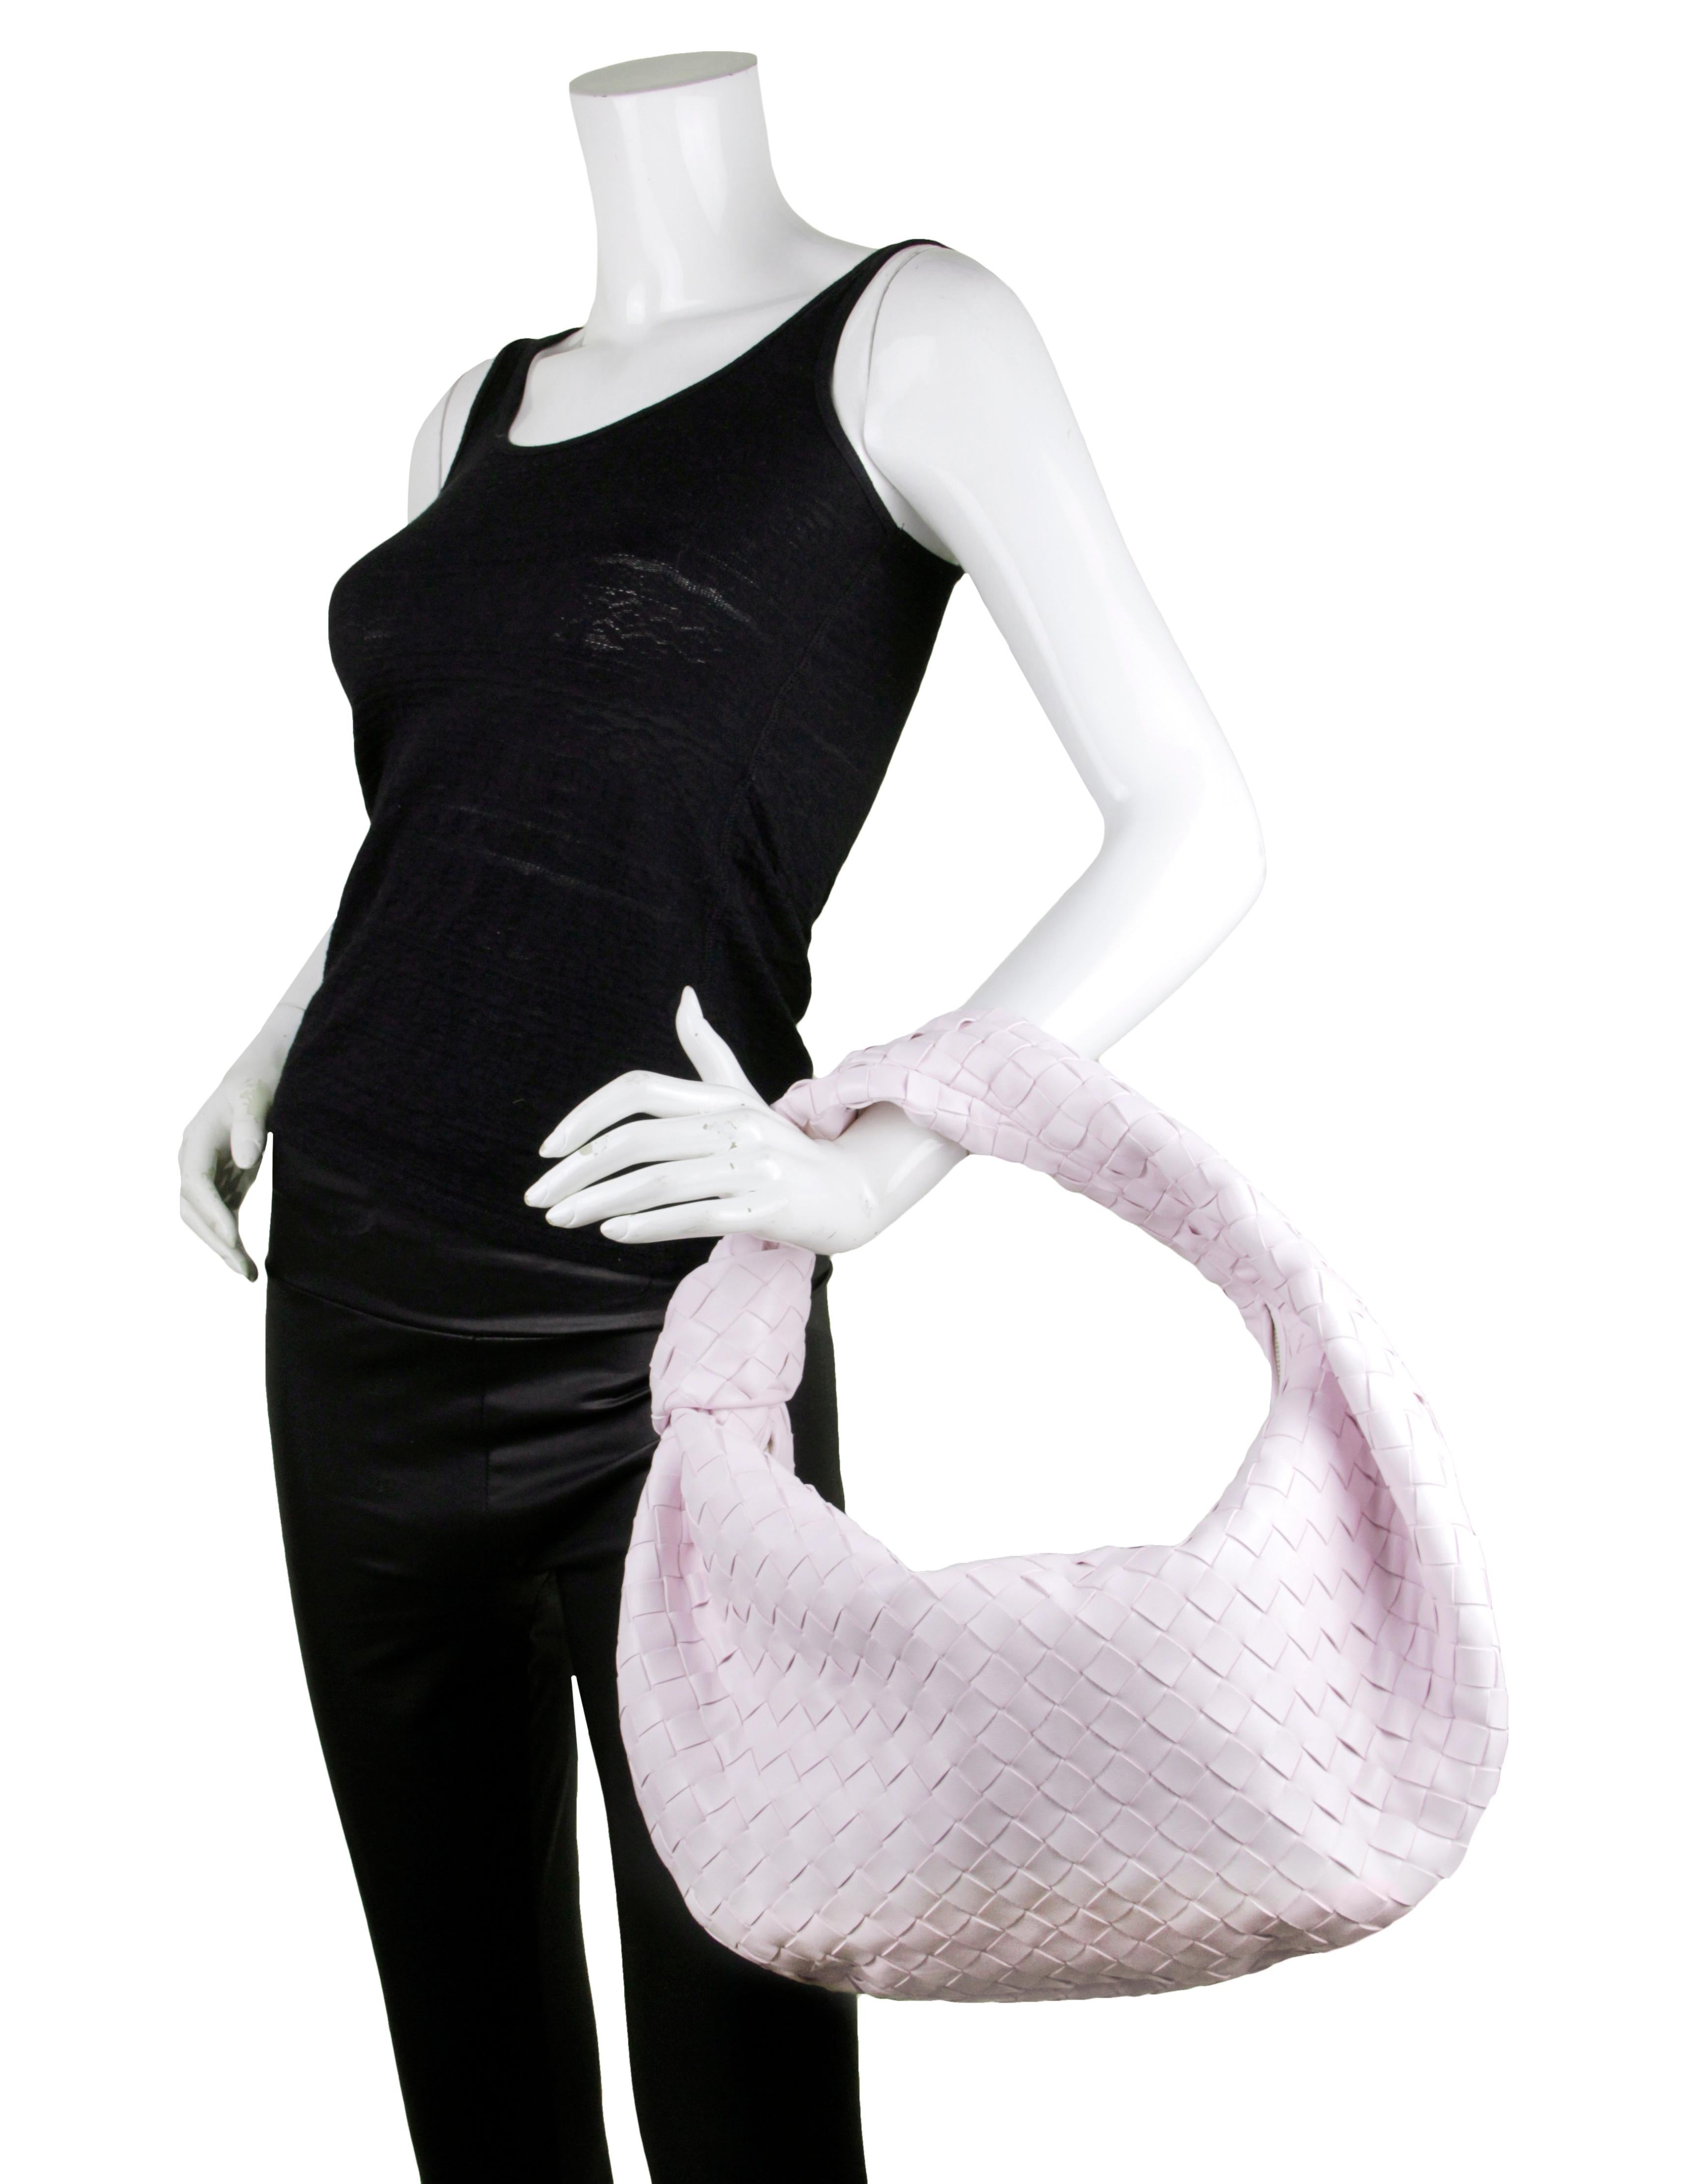 Bottega Veneta Bliss Washed Pink Leather Small Jodie Hobo Bag

Made In: Italy
Year of Production: 2020-2022
Color: Pale 